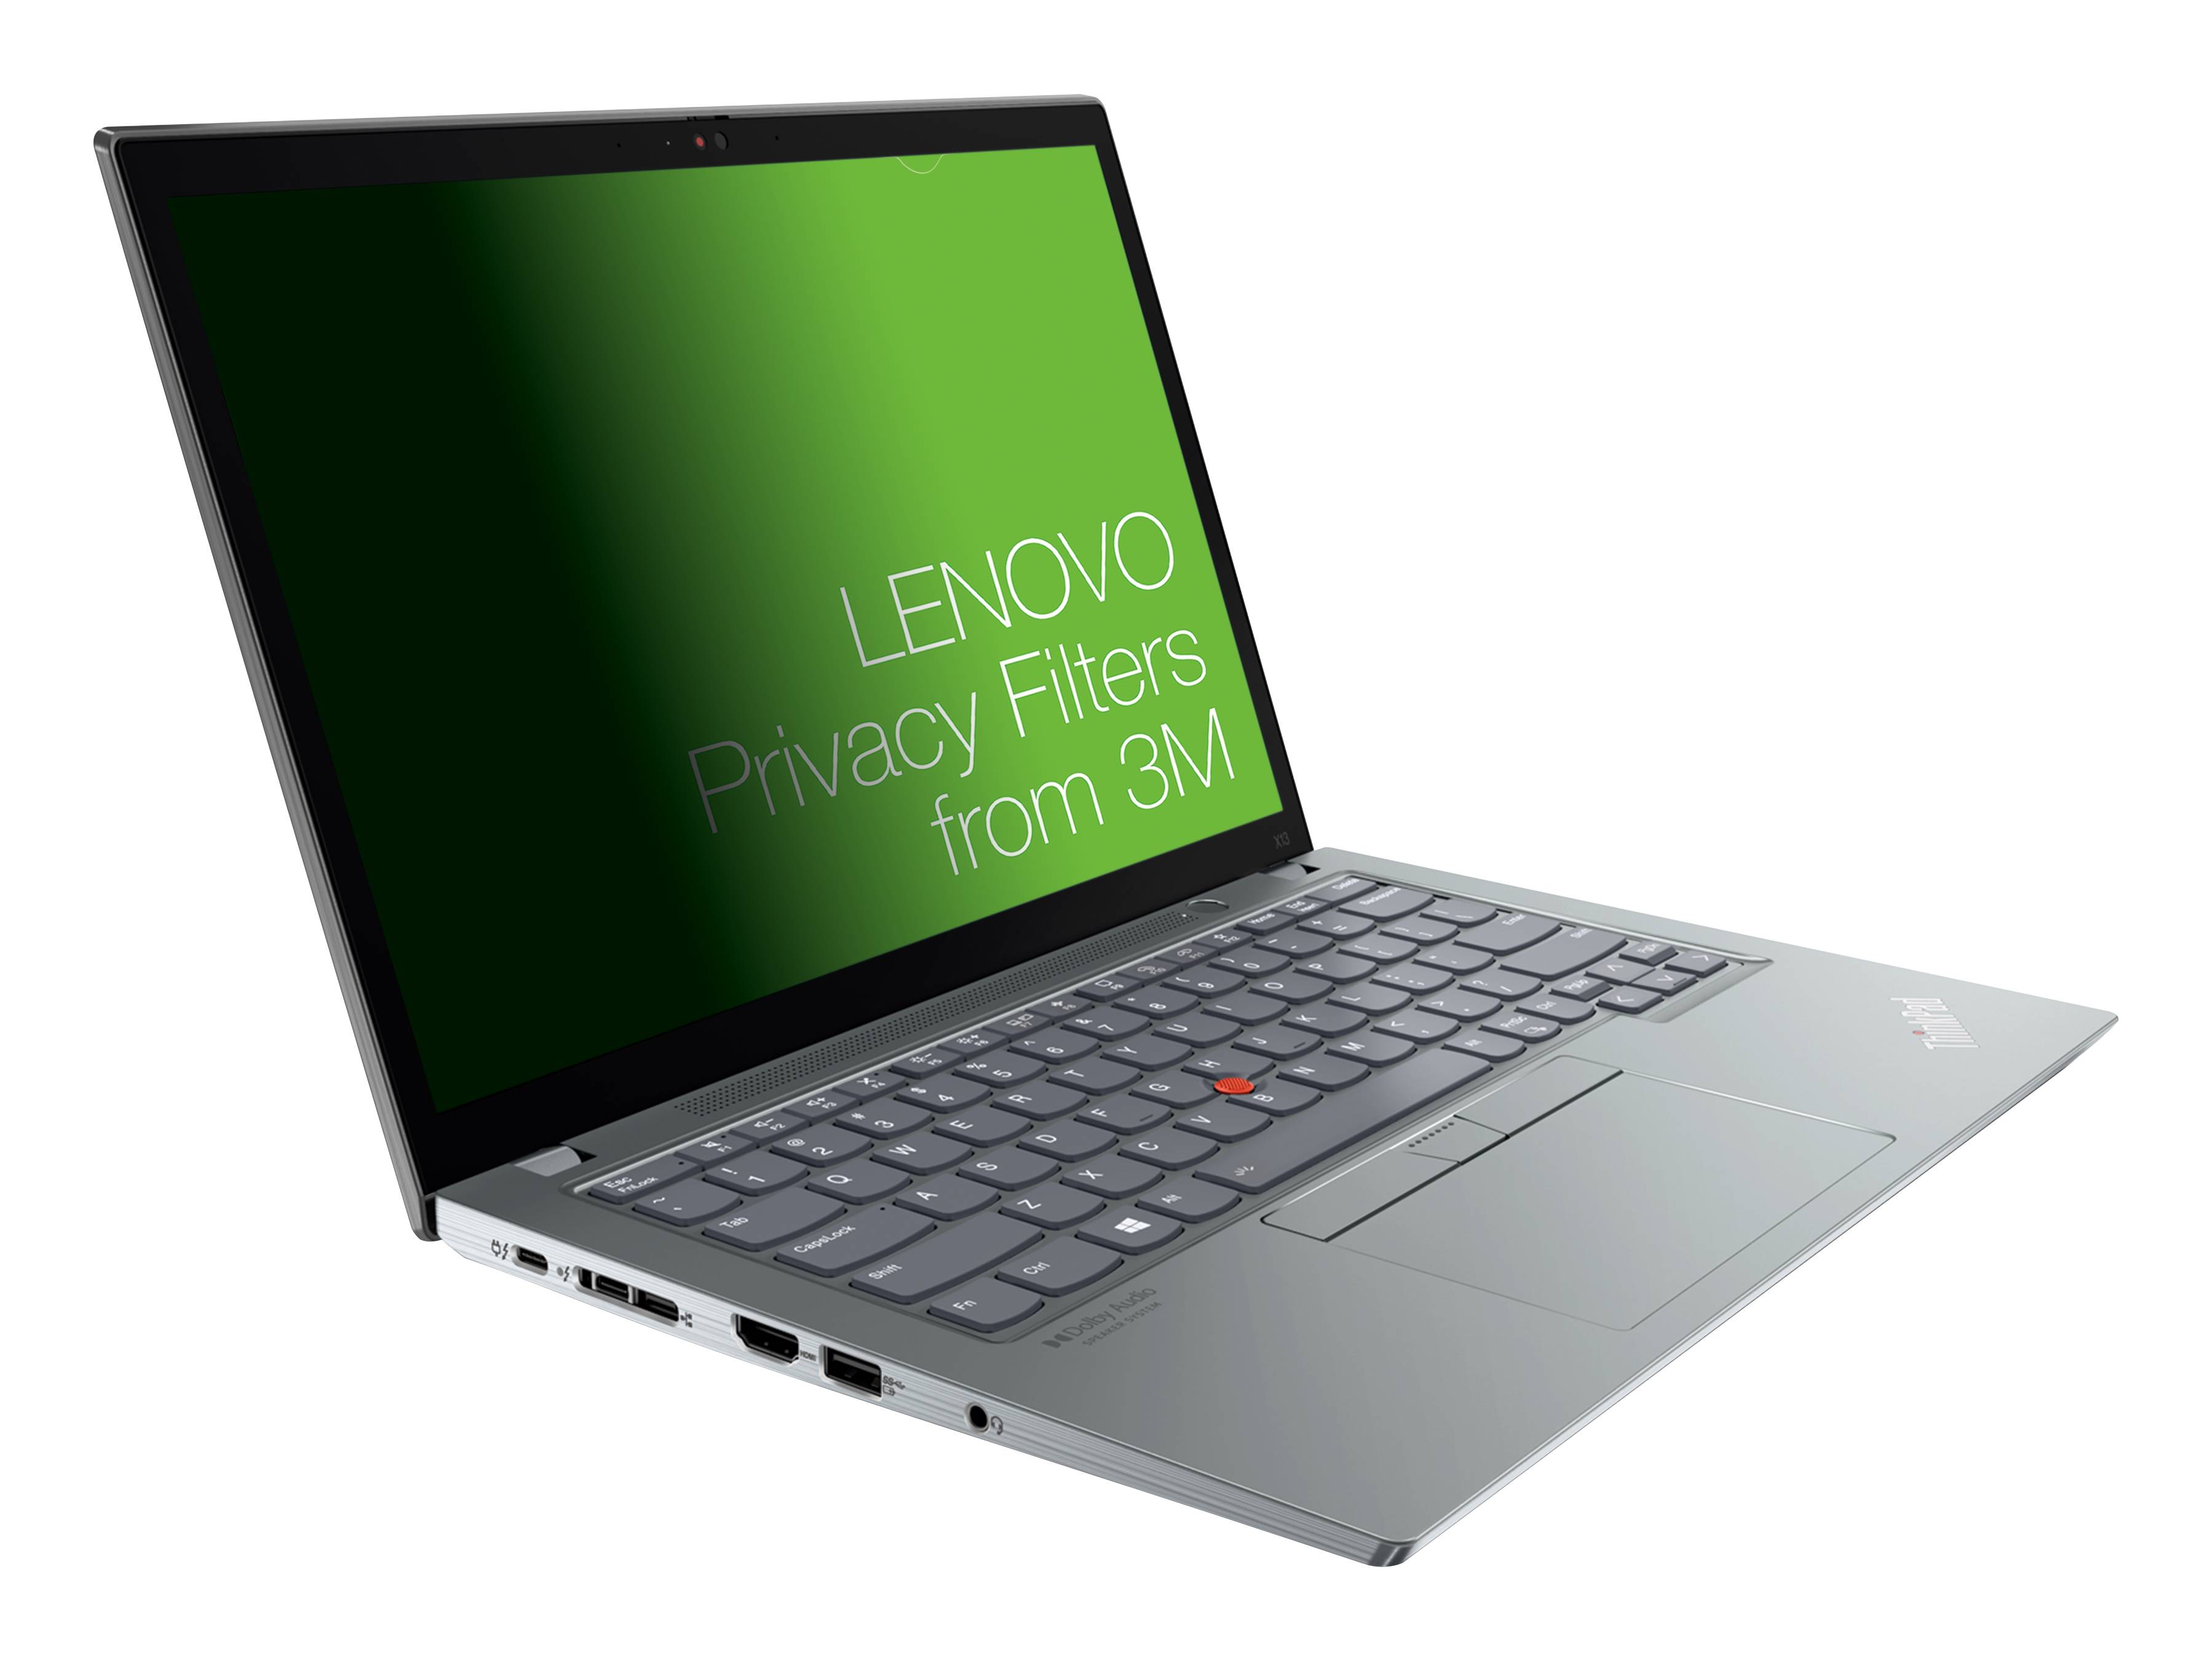 Rca Informatique - image du produit : LENOVO 13.3 INCH PRIVACY FILTER FOR X13 GEN2 WITH COMPLY ATTACHM